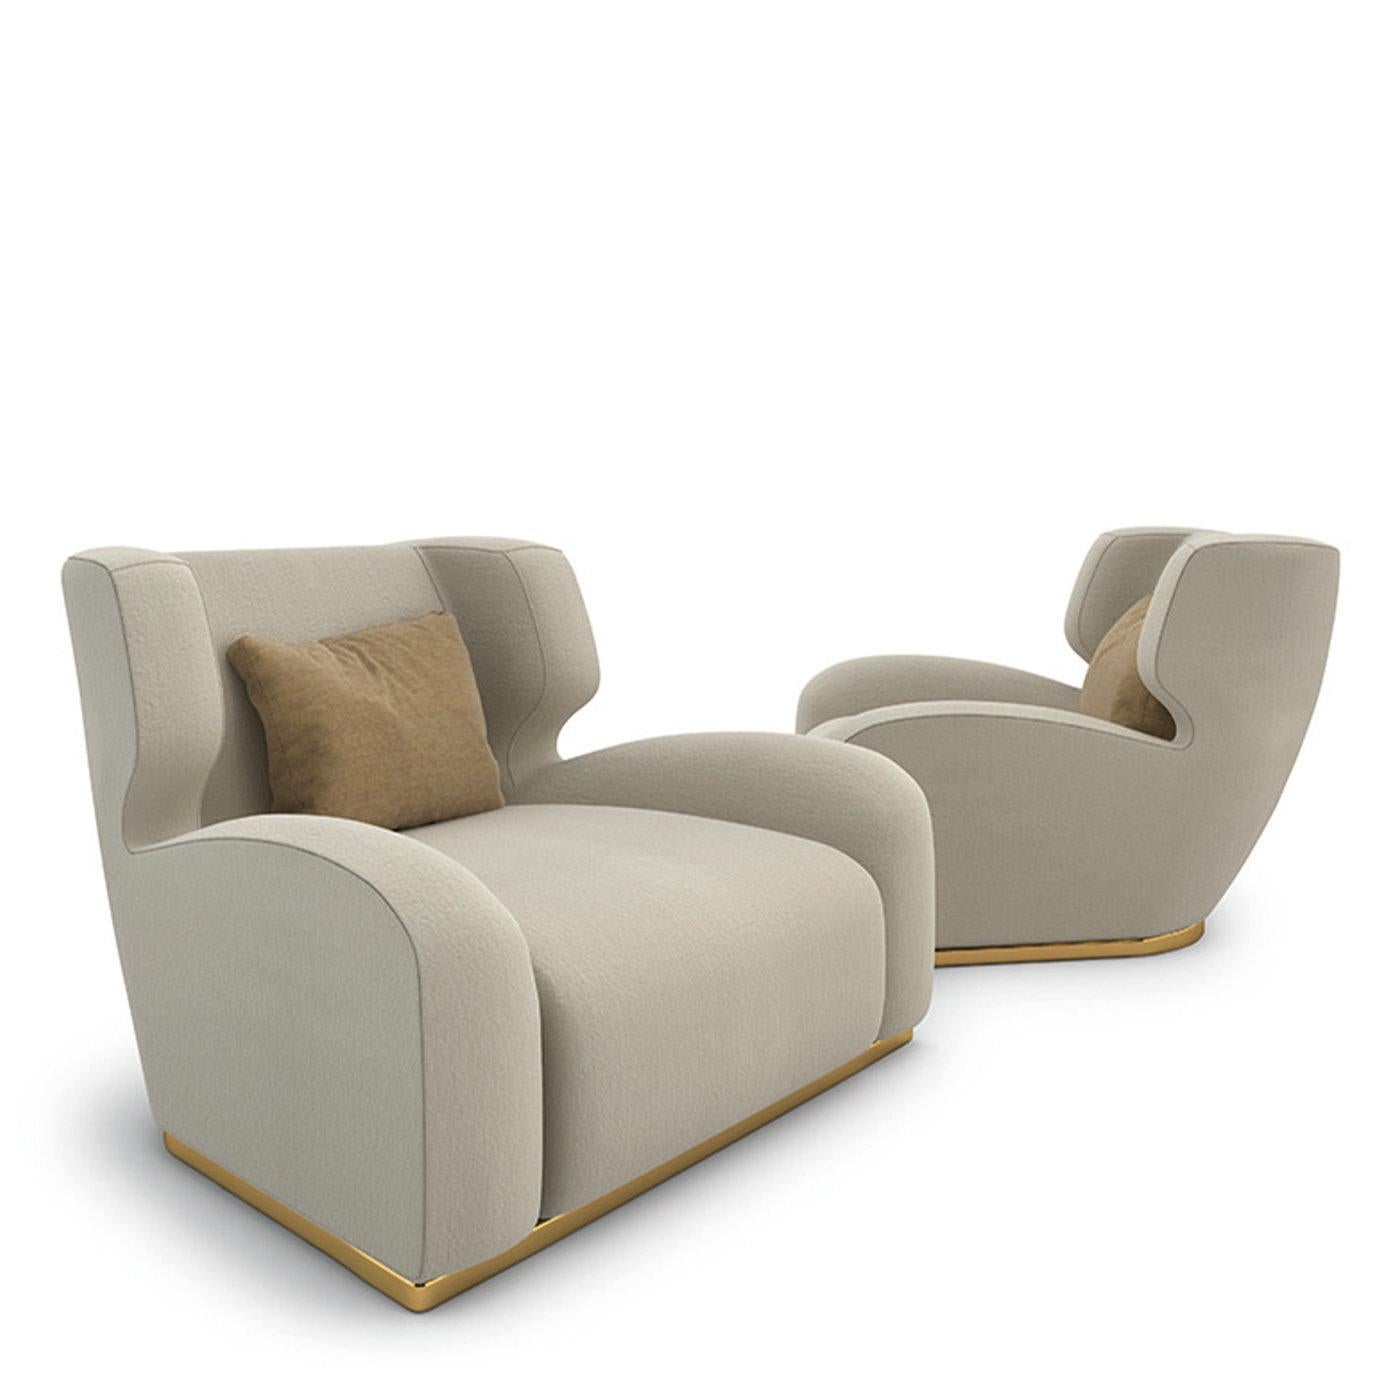 This astonishing armchair by Giannella Ventura is a tribute to American cartoonist, author, and painter Carl Barks. Defined by soft and sinuous lines, it features a welcoming padded seat with embracing back and armrests, entirely upholstered with a